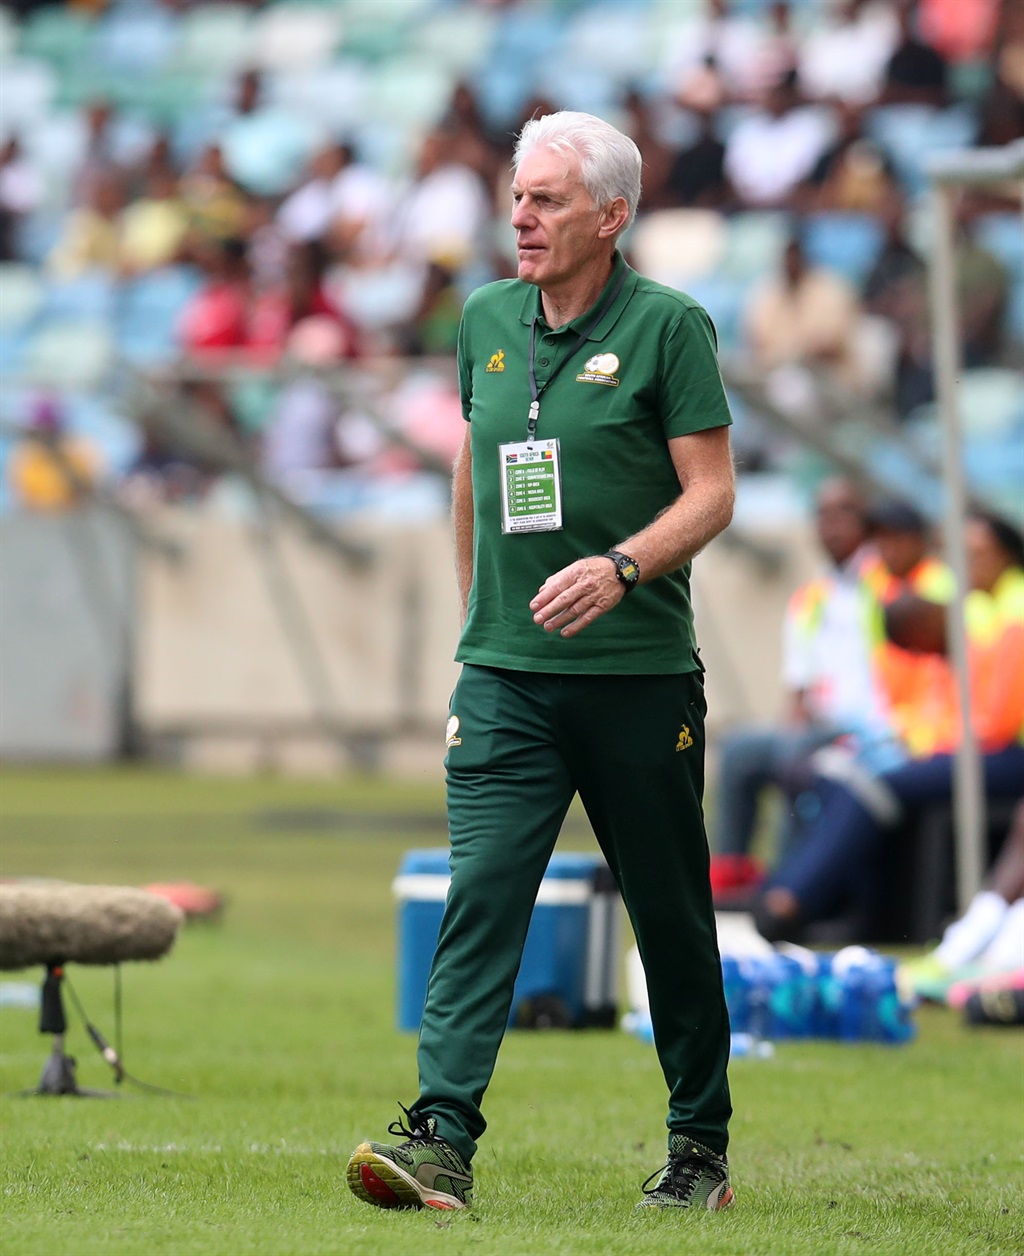 Hugo Broos, coach of South Africa during the FIFA World Cup qualifiers 2026 match between South Africa and Benin at the Moses Mabhida Stadium, Durban on 18 November 2023 